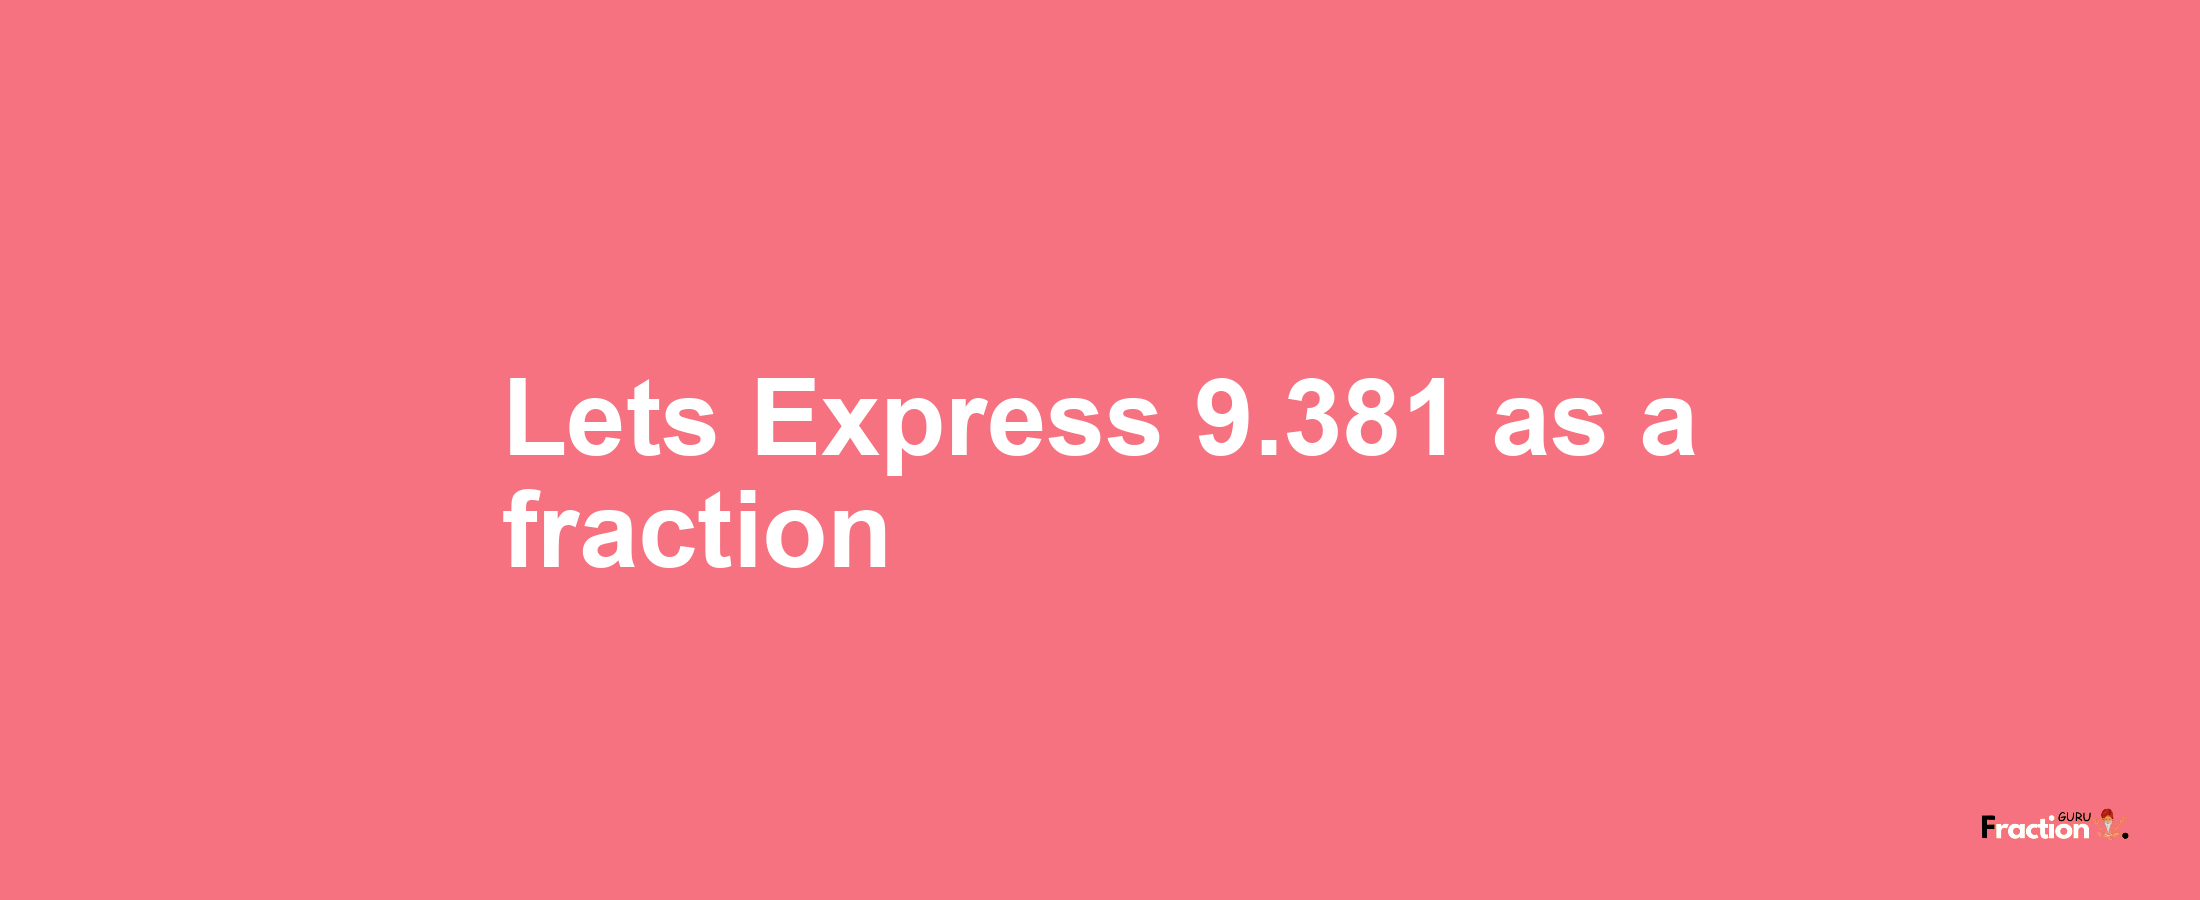 Lets Express 9.381 as afraction